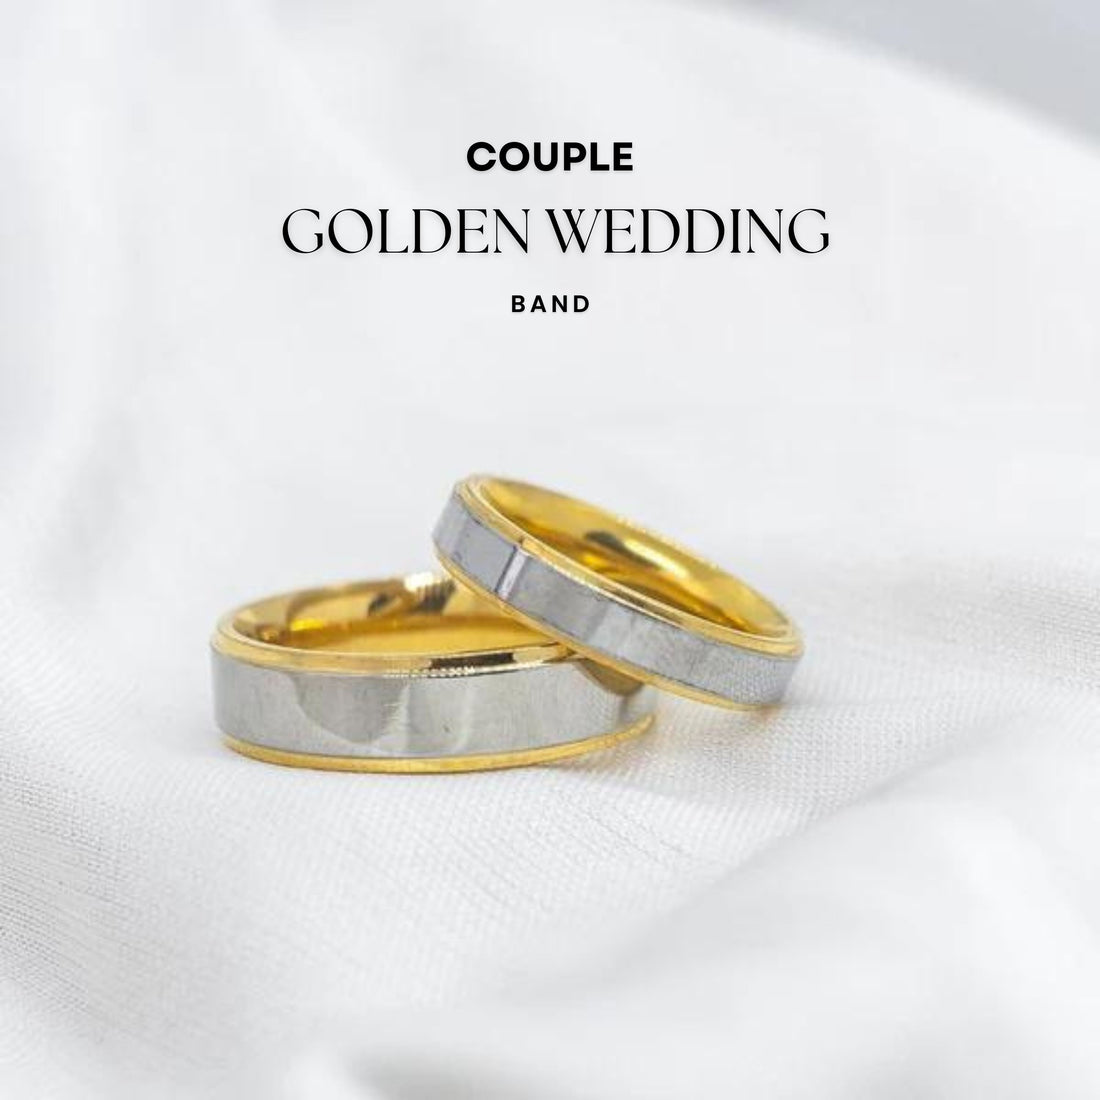 If your wife is sharp Like a knife - To Stay safe, order Steel Couple Golden Wedding Band This Black Friday.